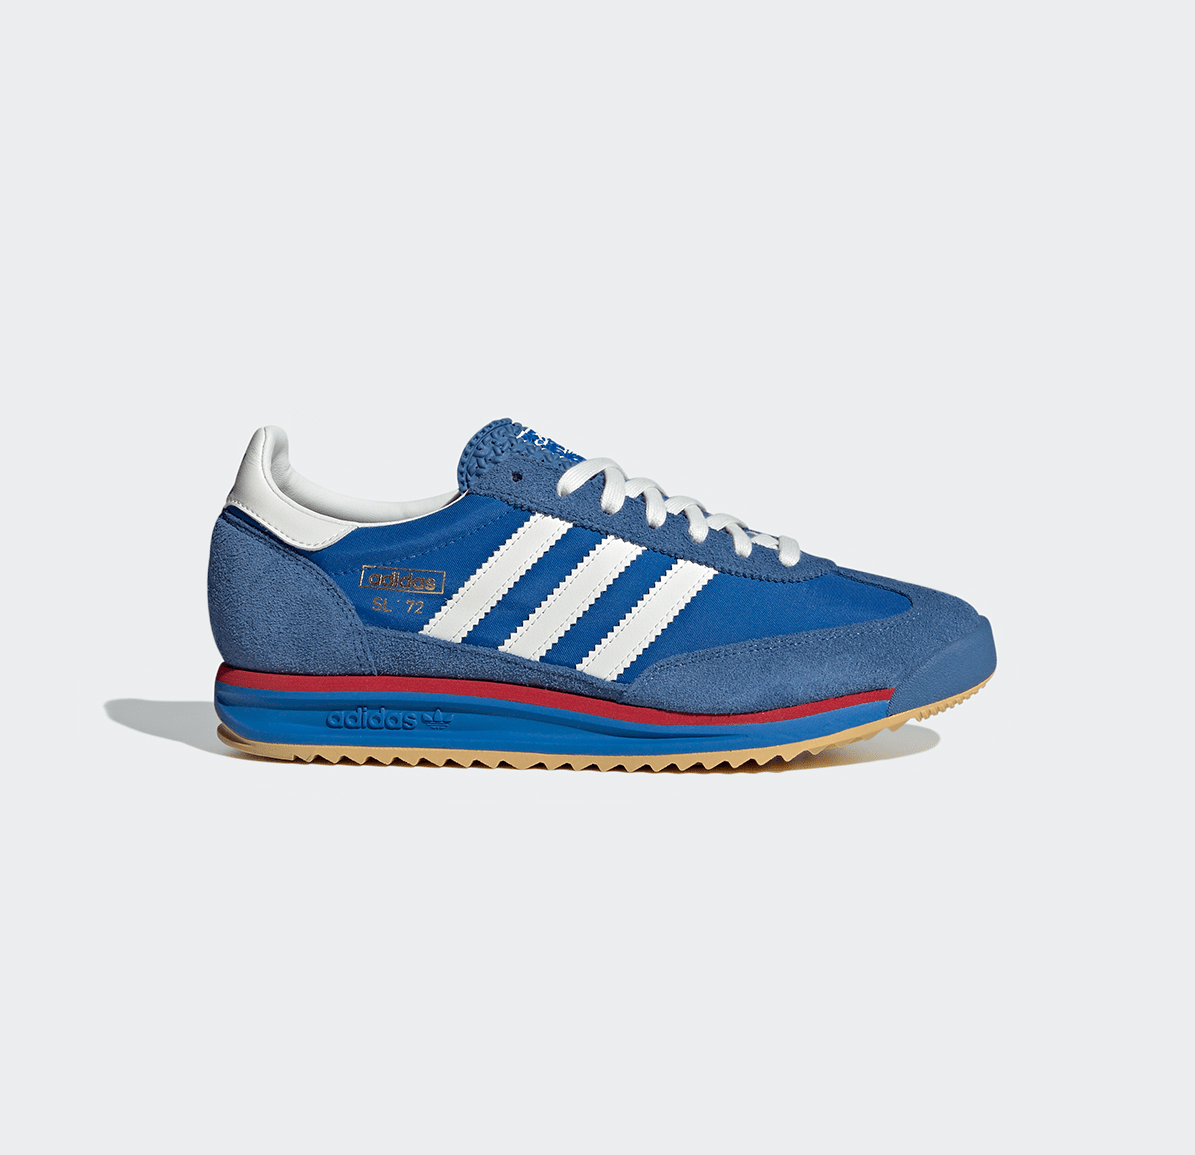 Adidas SL 72 RS - Blue/Core White/Better Scarlet - Adidas - State Of Play